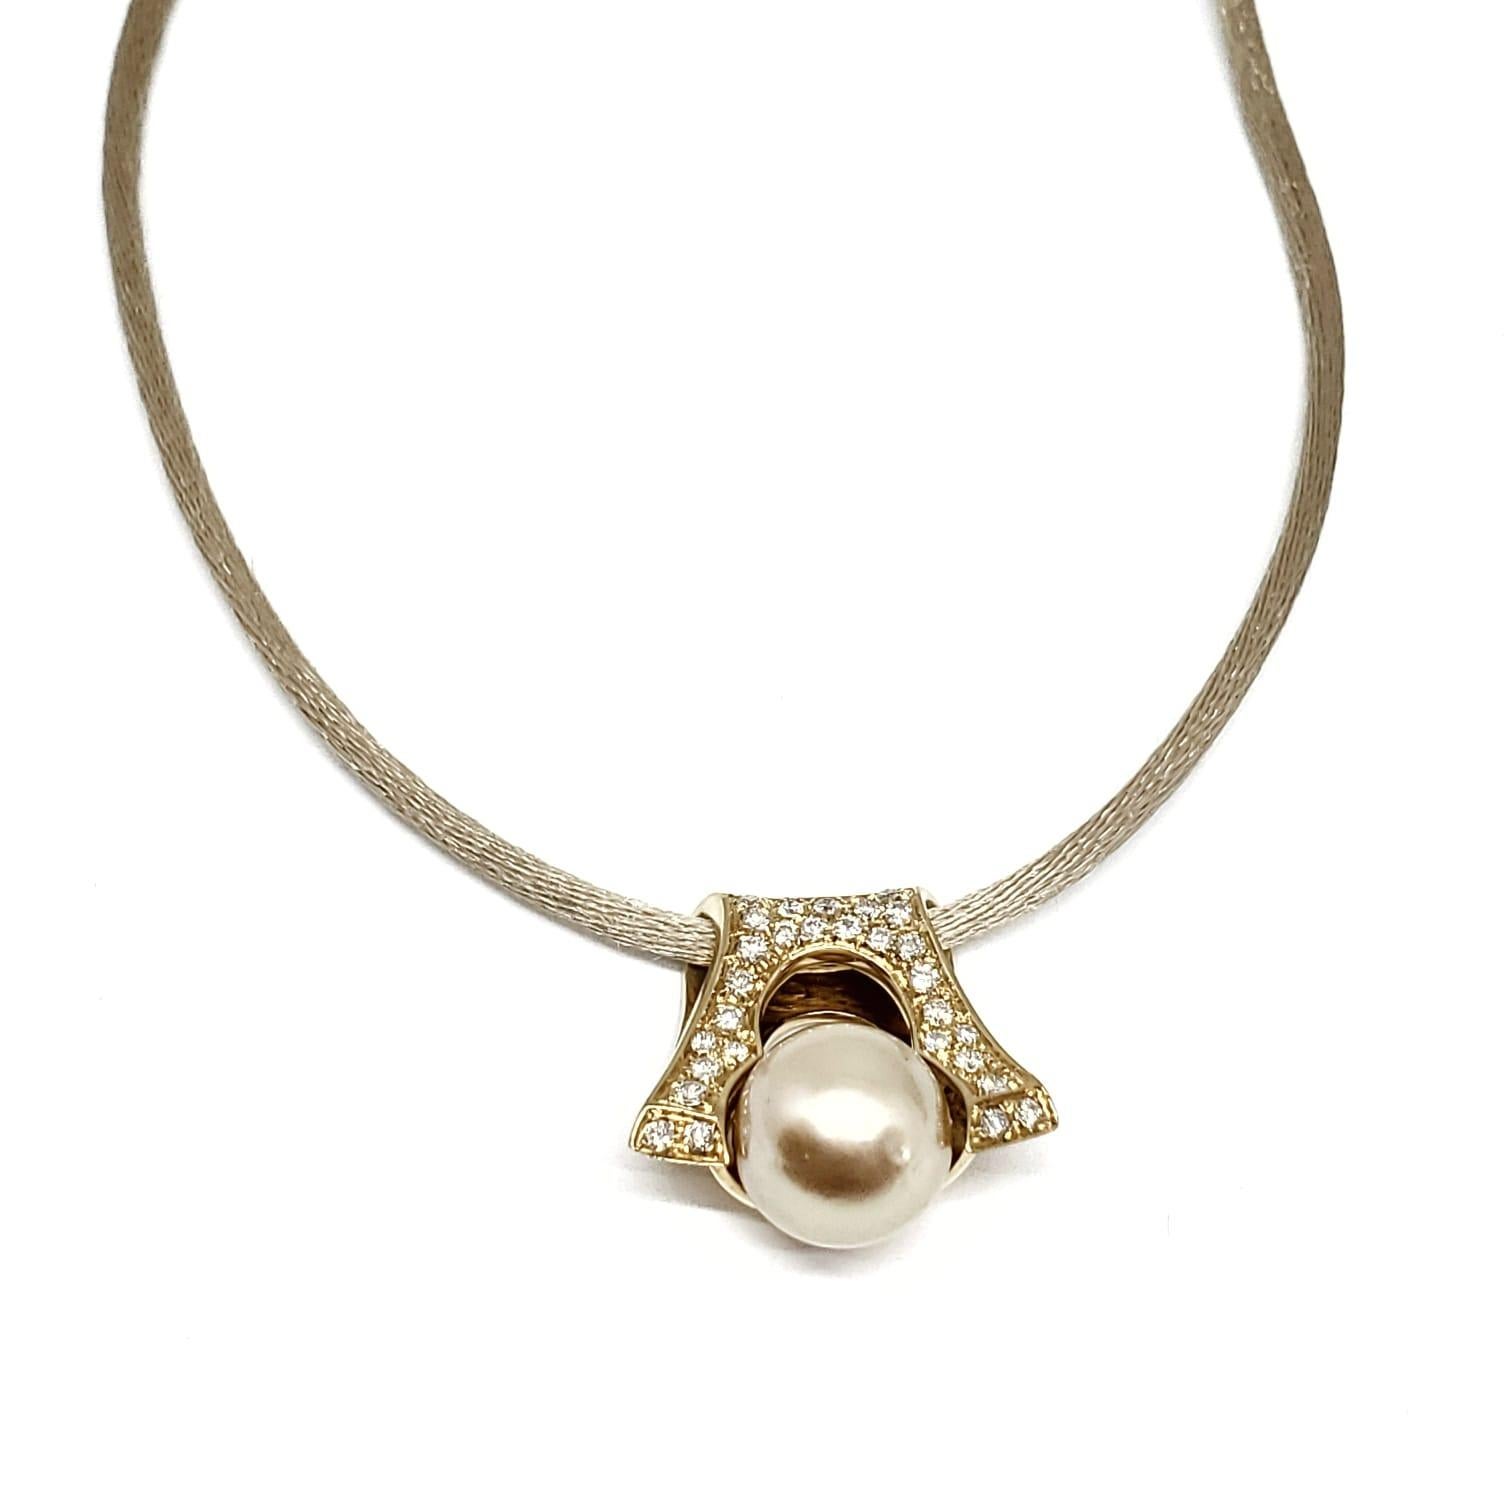 Andreoli Golden South Sea Pearl Pendant Diamond Satin Silk Cord 18k Yellow Gold

This Andreoli Pendant features:

- 0.42 carat Diamond
- 11mm round Golden South Sea Pearl
- 10.55 grams 18 Karat Yellow Gold
- Made in Italy